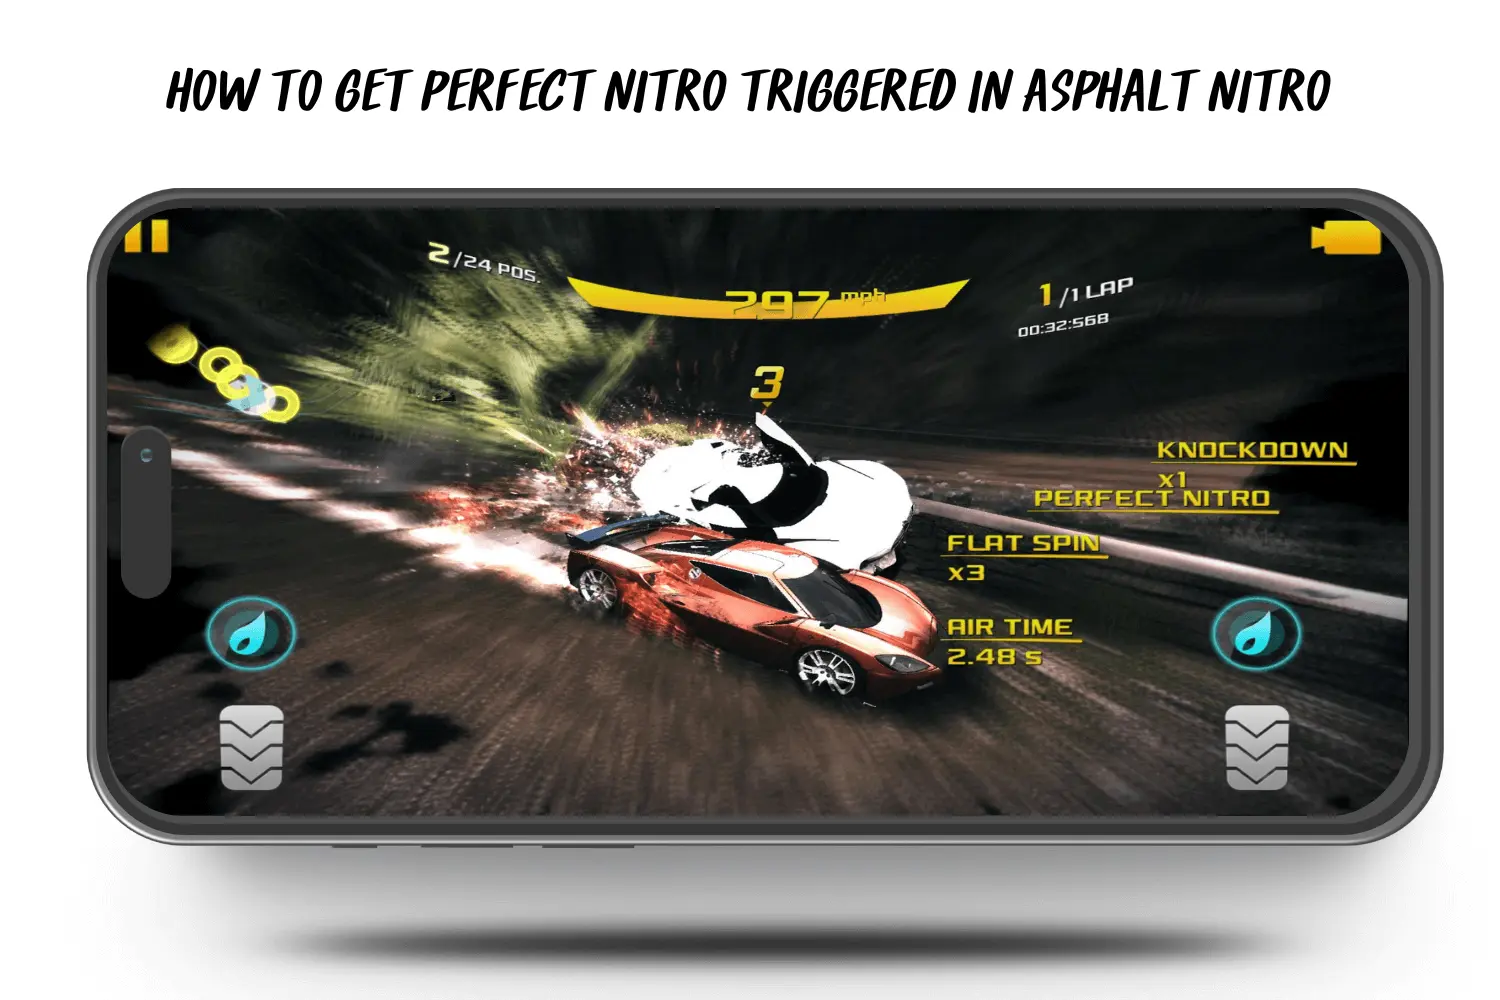 HOW TO GET PERFECT NITRO TRIGGERED IN ASPHALT NITRO